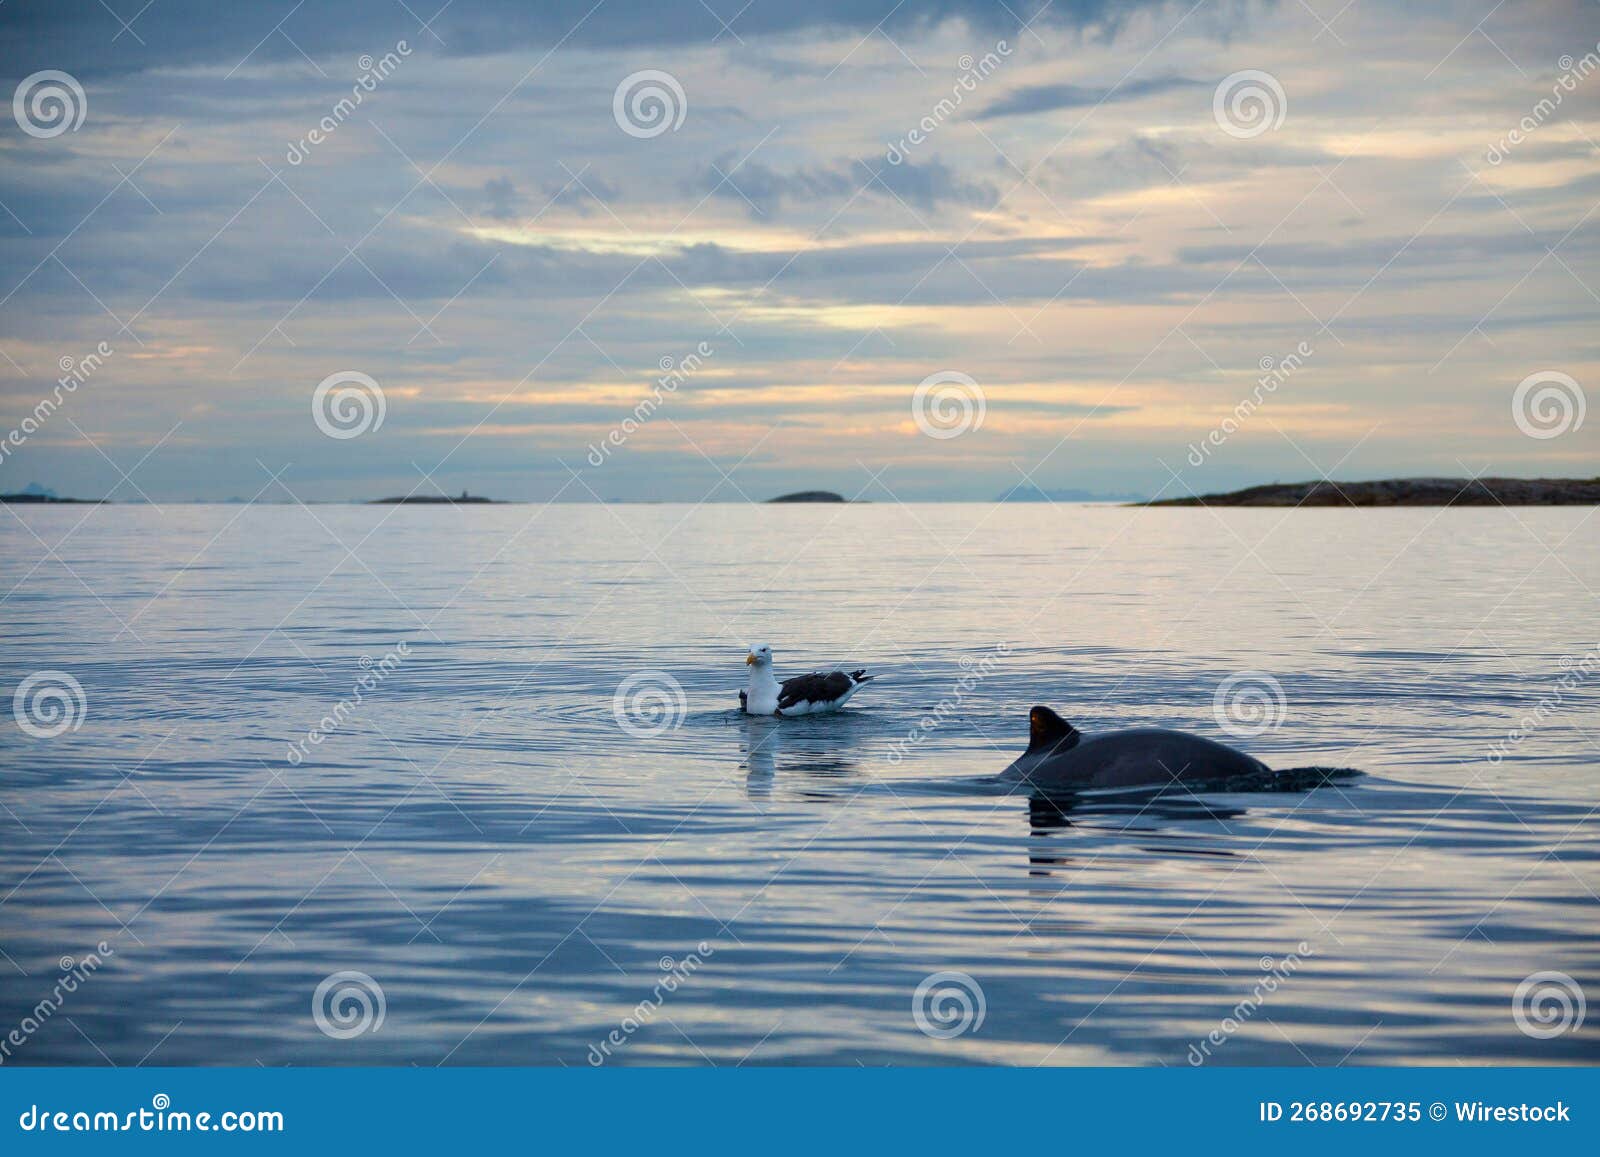 view of a seagull and a cetacean fish swimming in the sea at sunrise